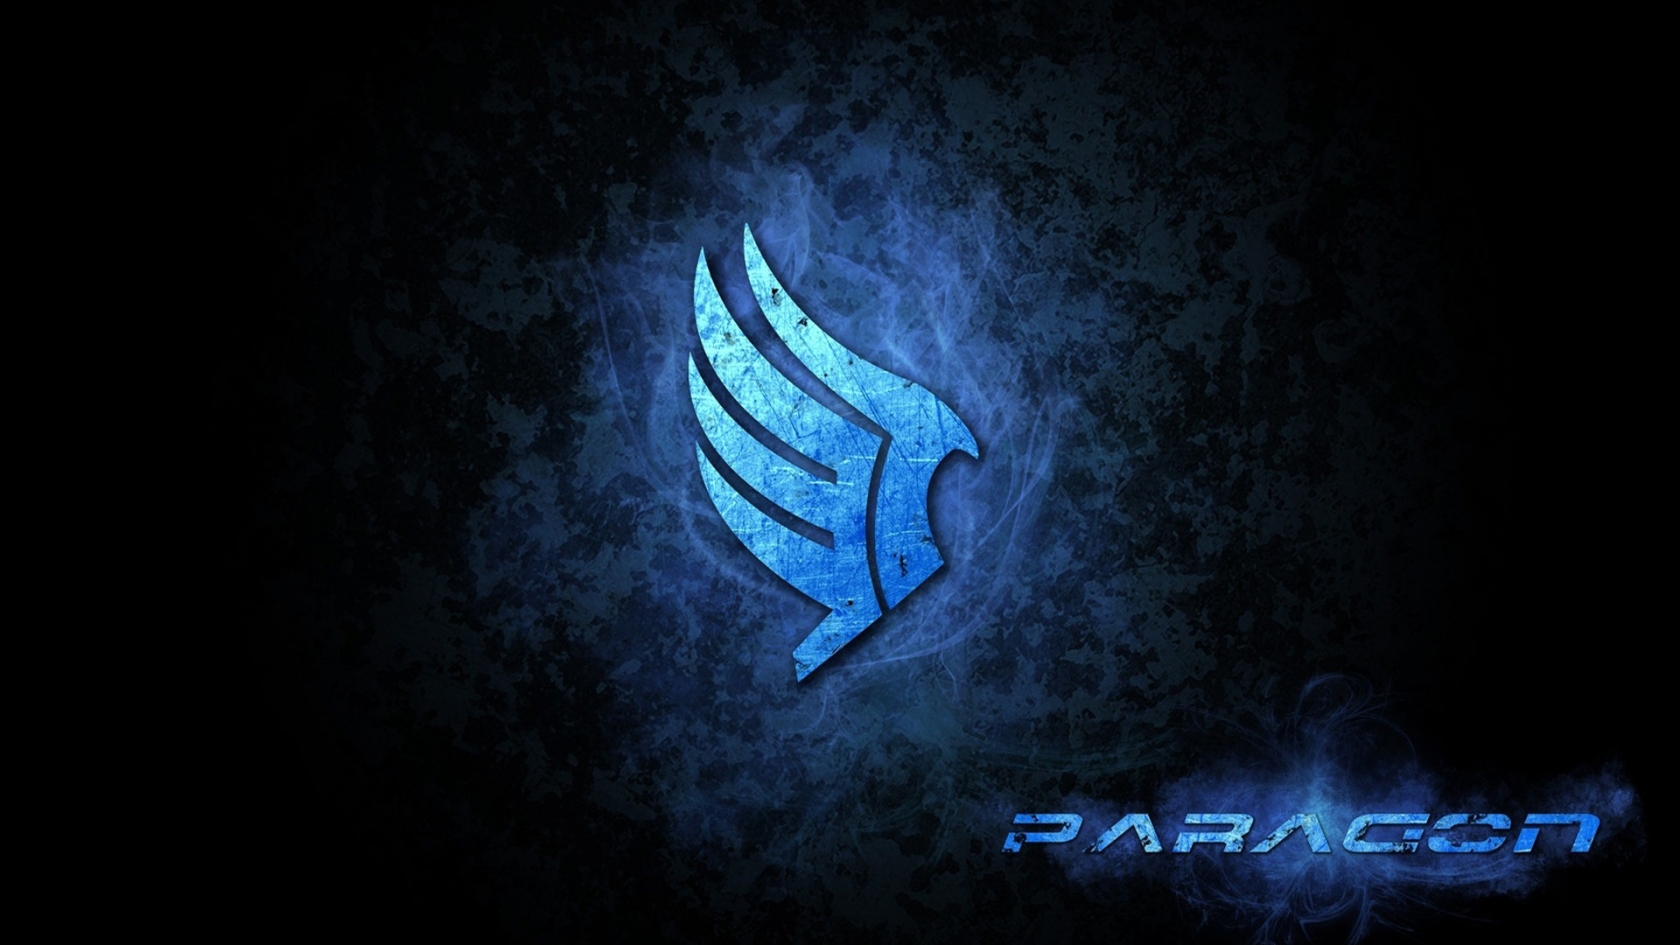 Paragon for 1680 x 945 HDTV resolution